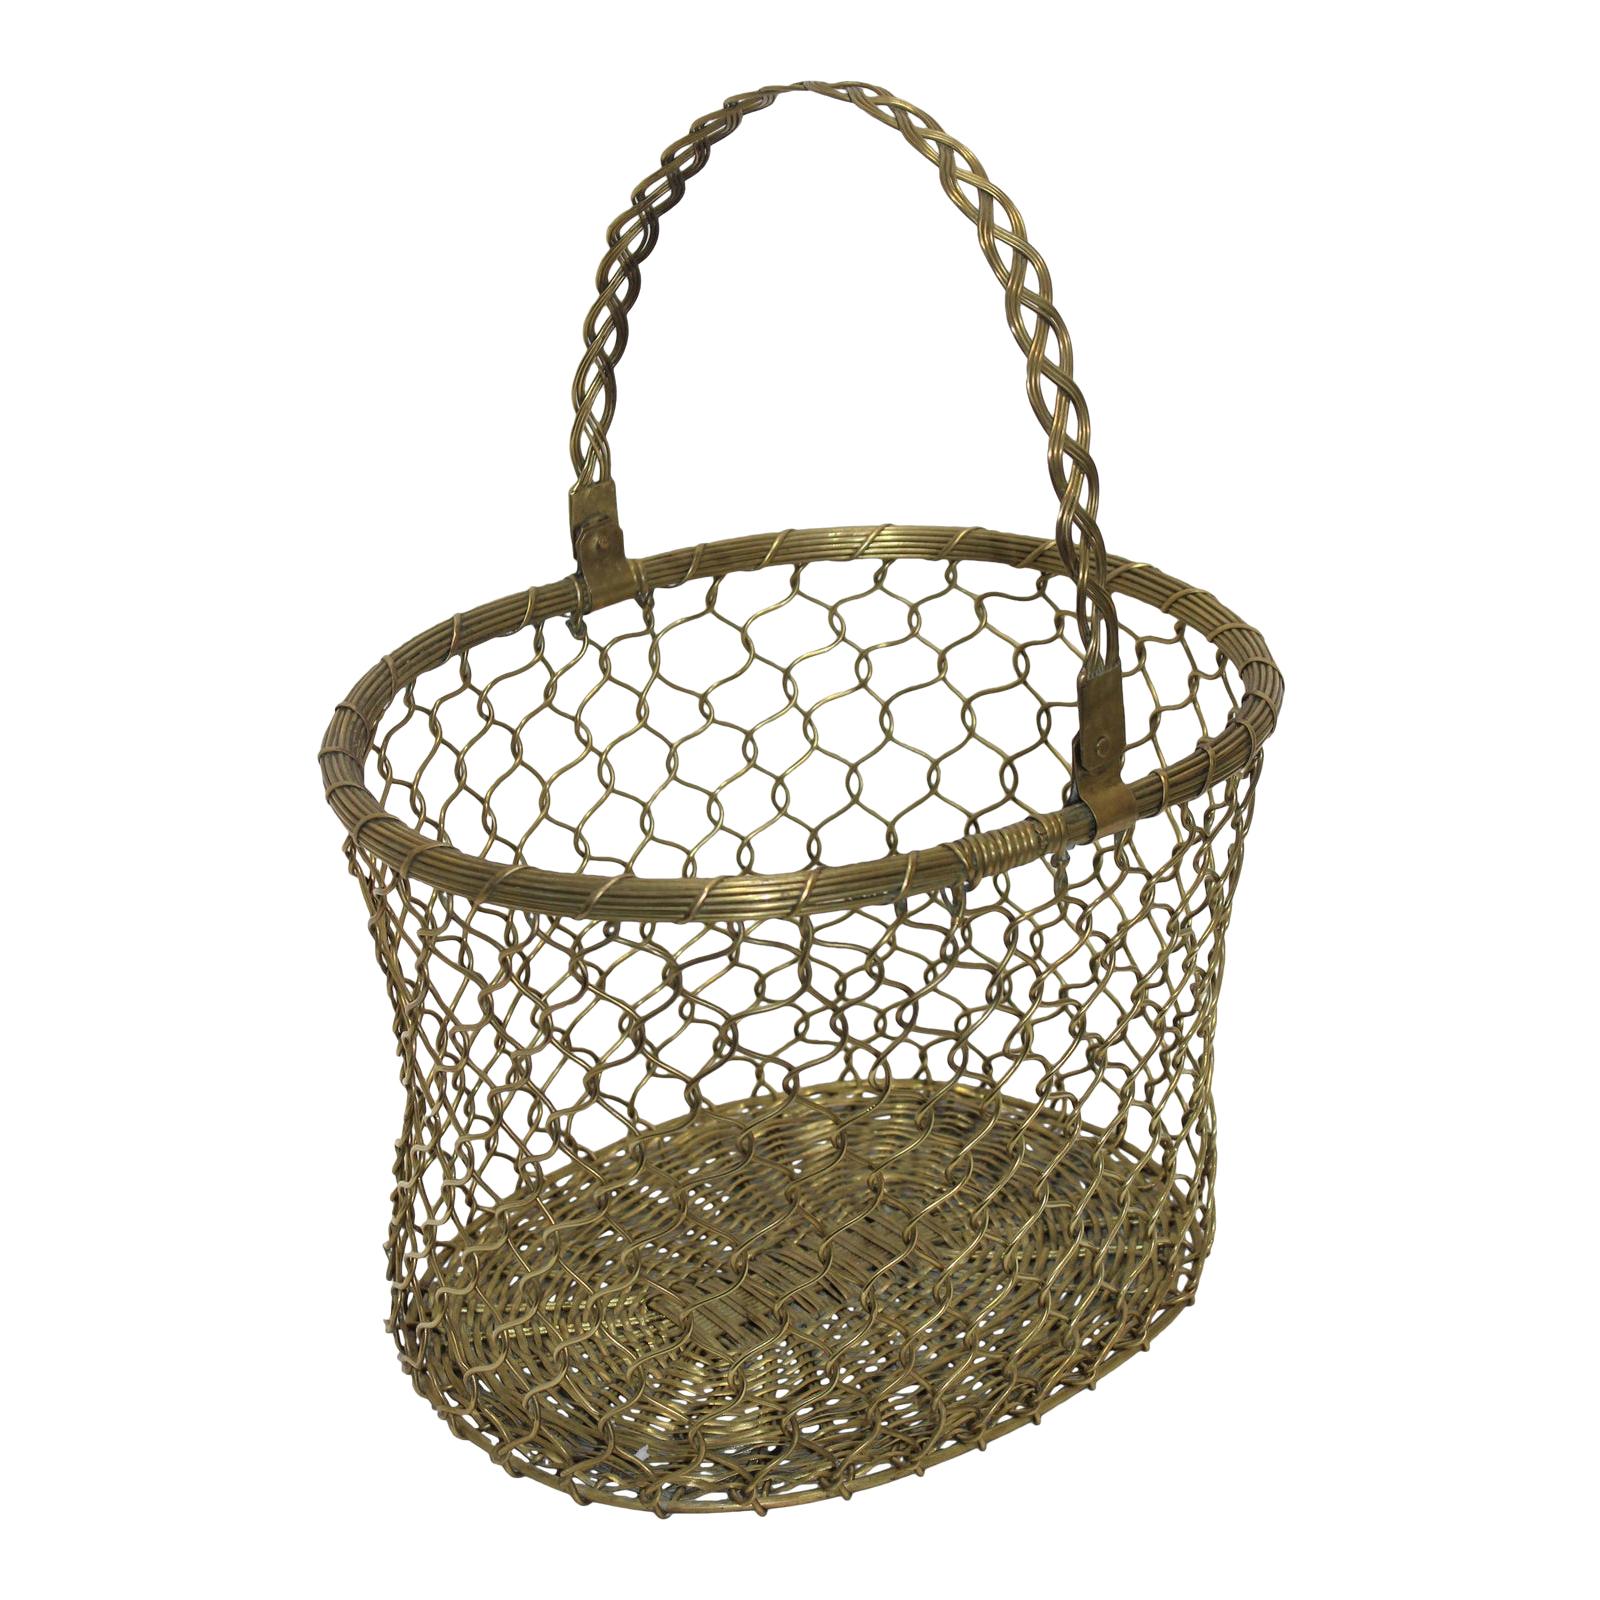 French Country Woven Brass Basket, Mid-20th Century